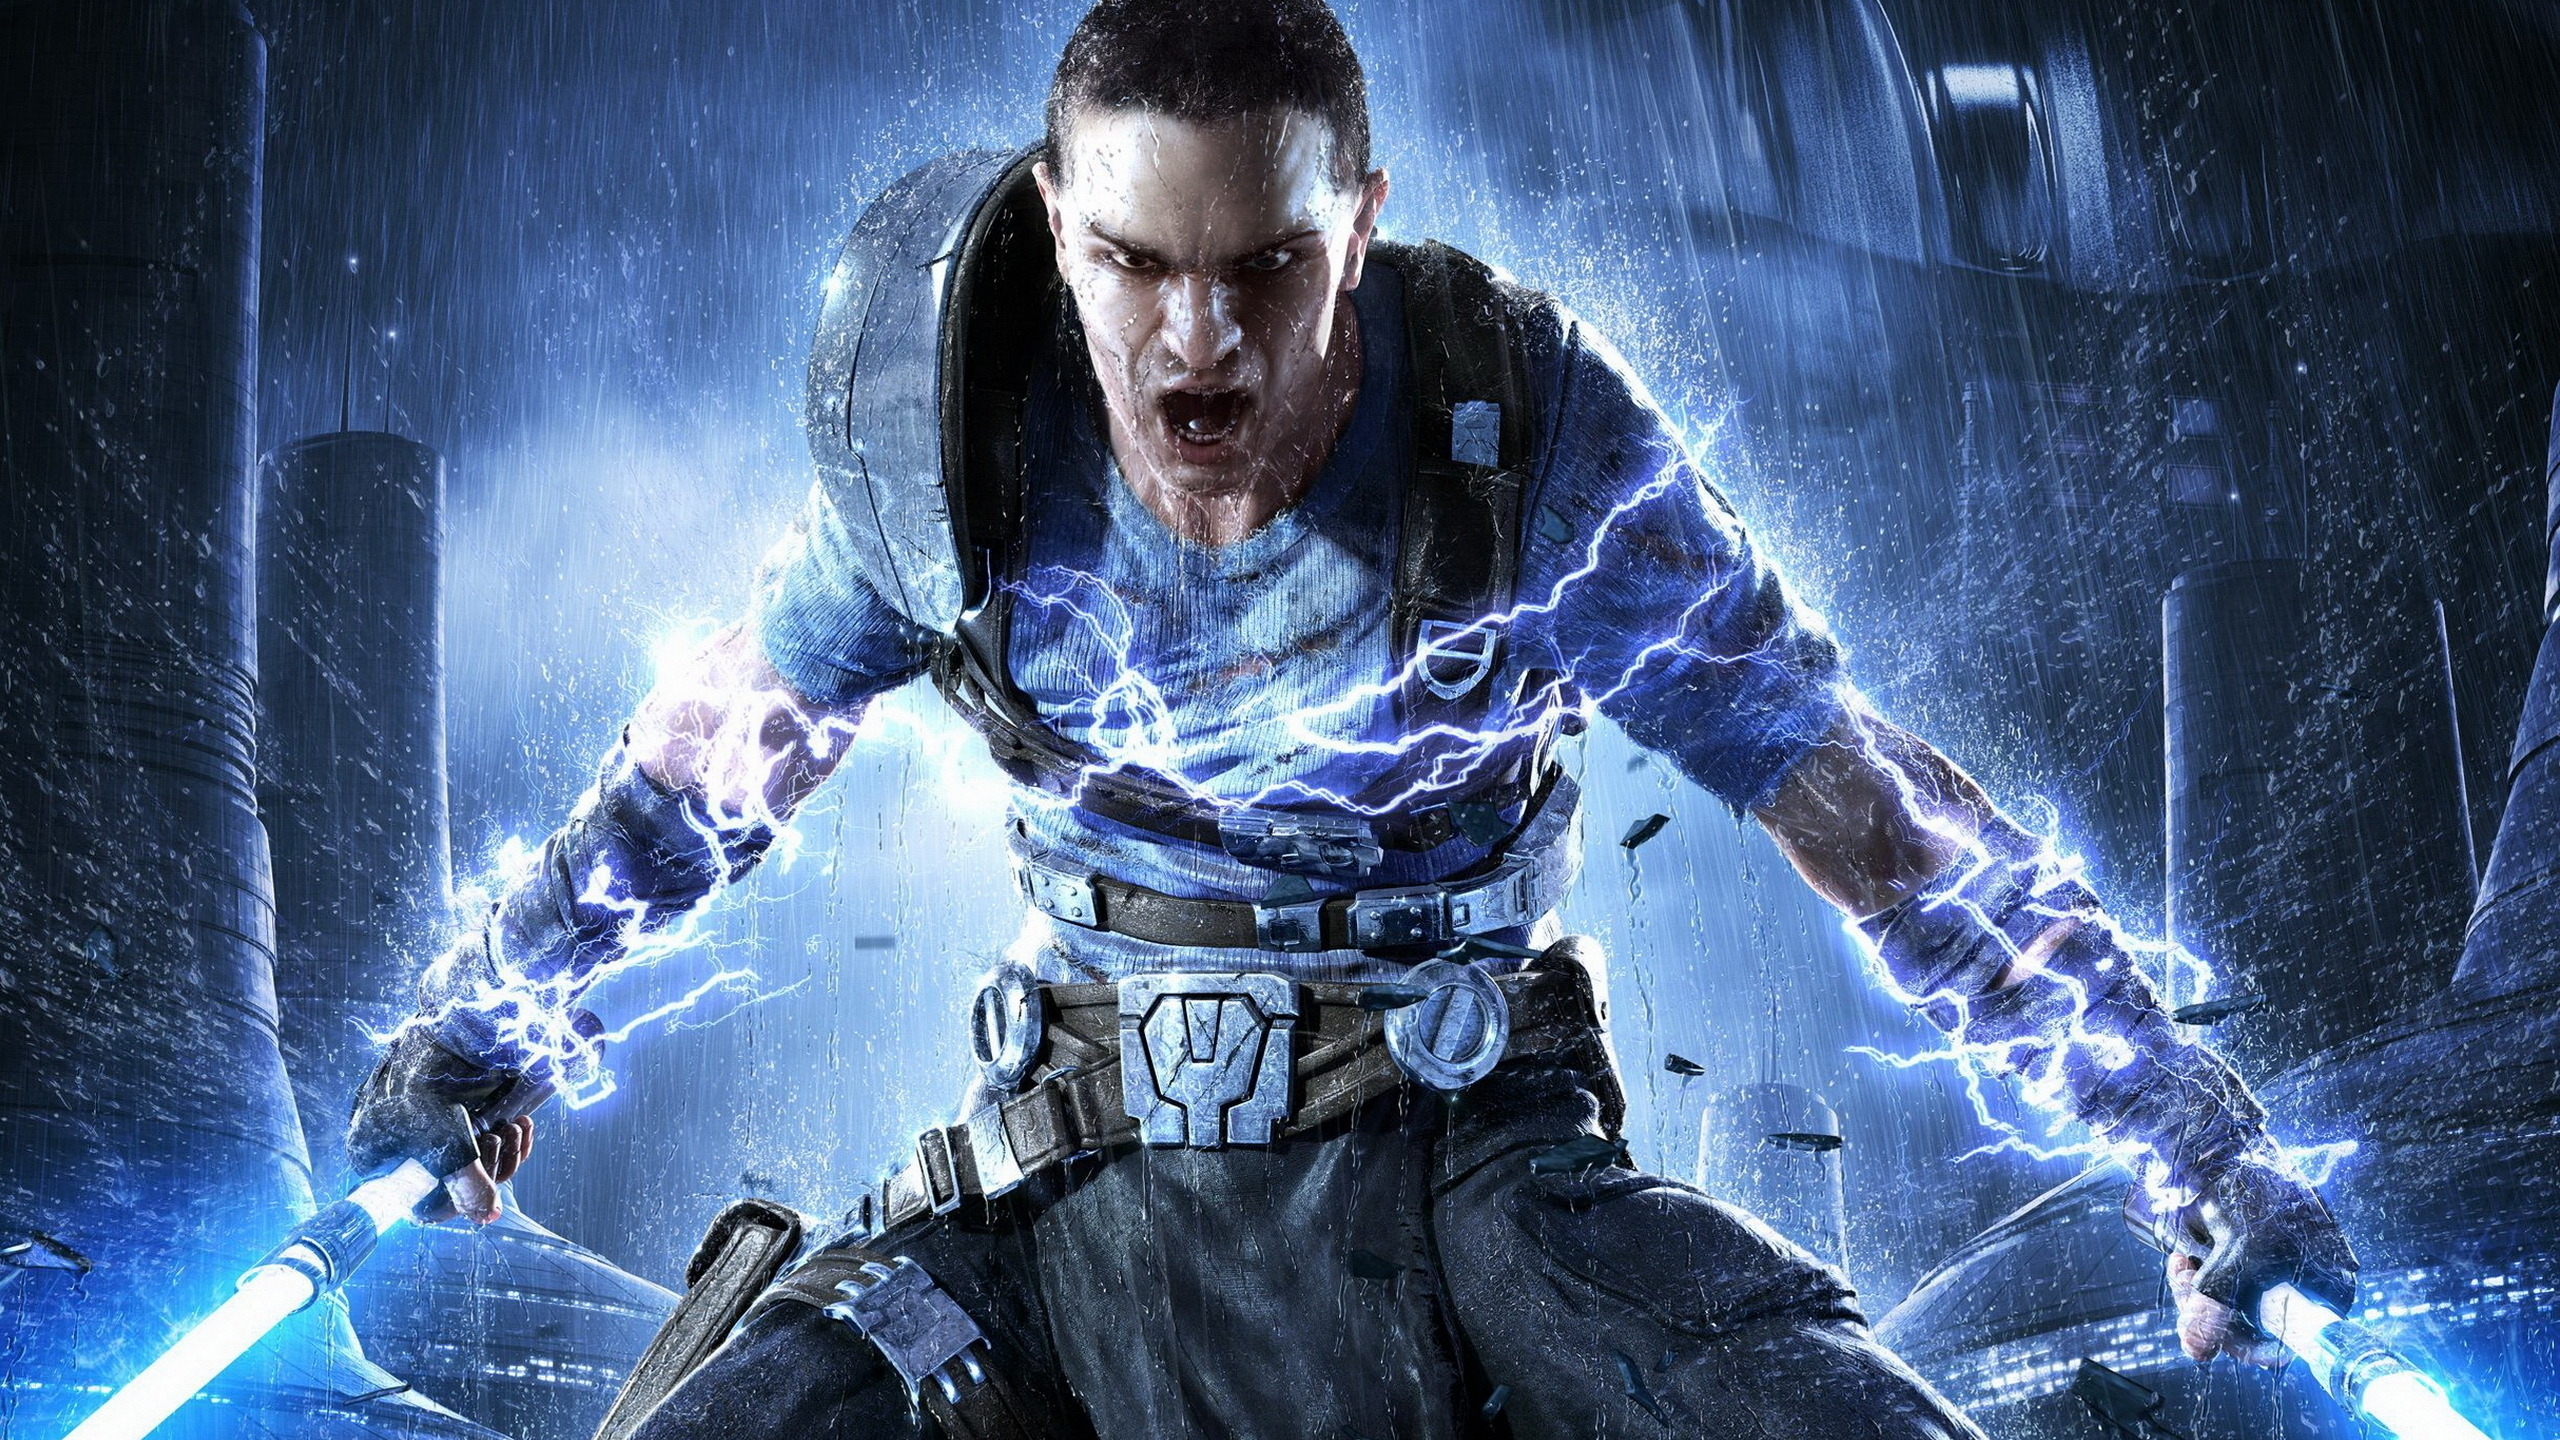 Star Wars Force Unleashed for 2560x1440 HDTV resolution